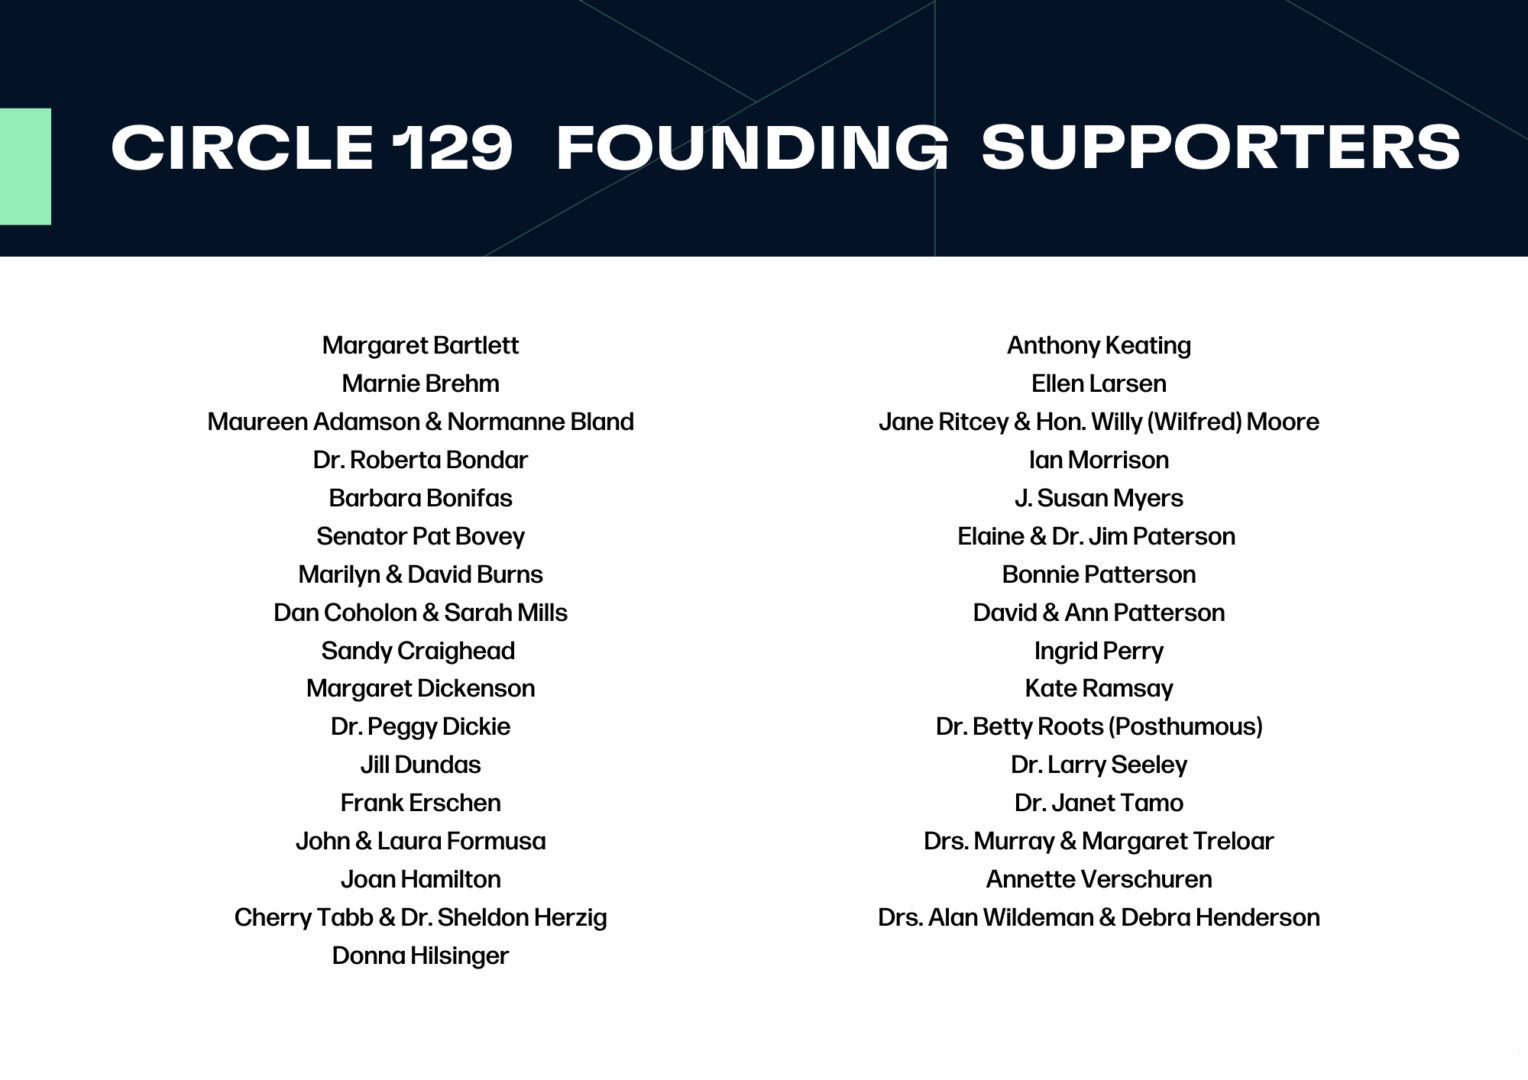 List of names of the current Circle 129 supporters